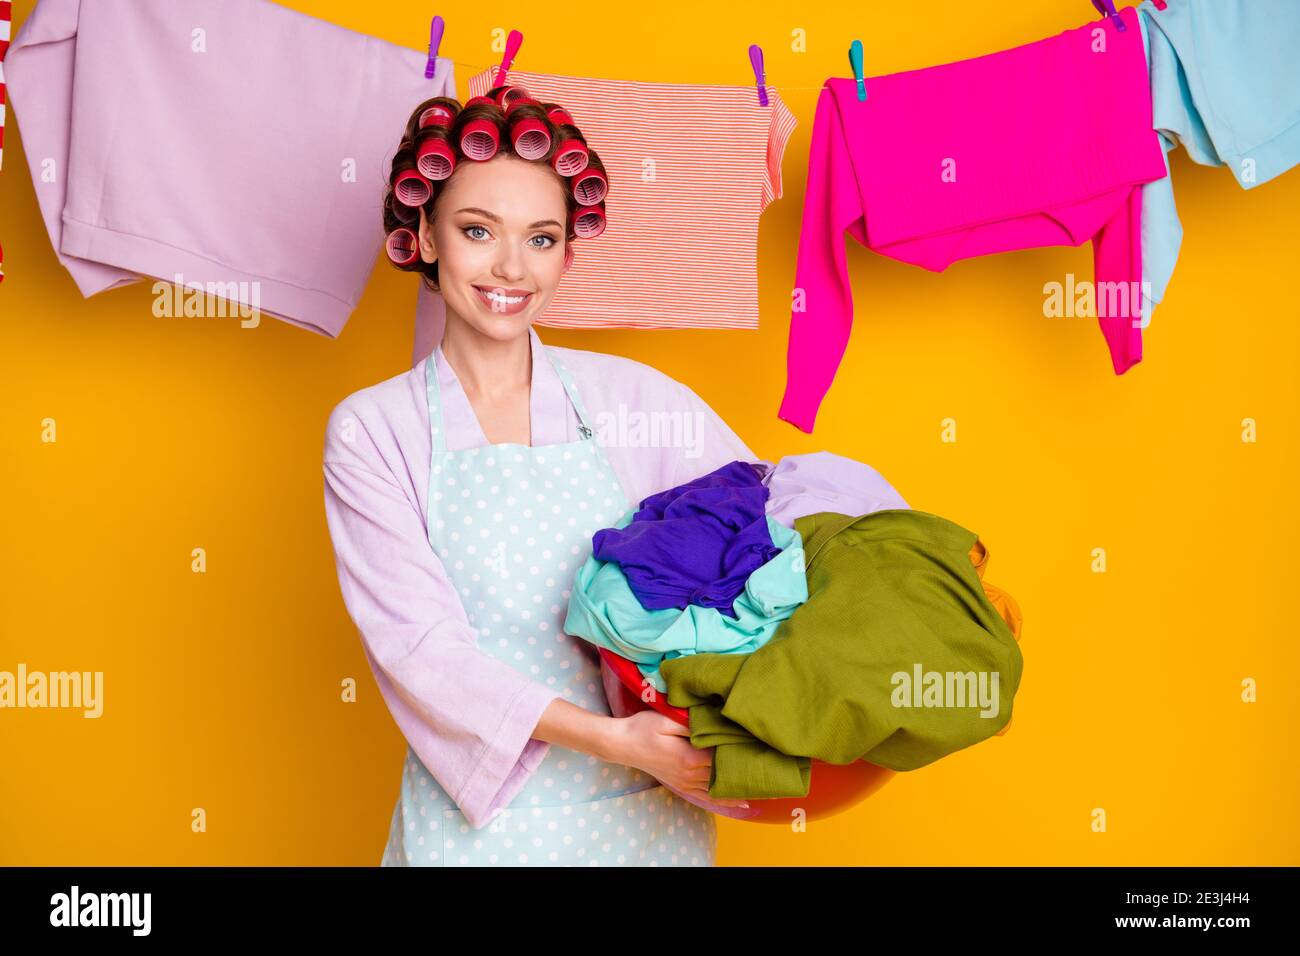 https://c8.alamy.com/comp/2E3J4H4/portrait-of-attractive-hardworking-cheerful-maid-holding-in-hand-dirty-wear-things-isolated-bright-orange-color-background-2E3J4H4.jpg